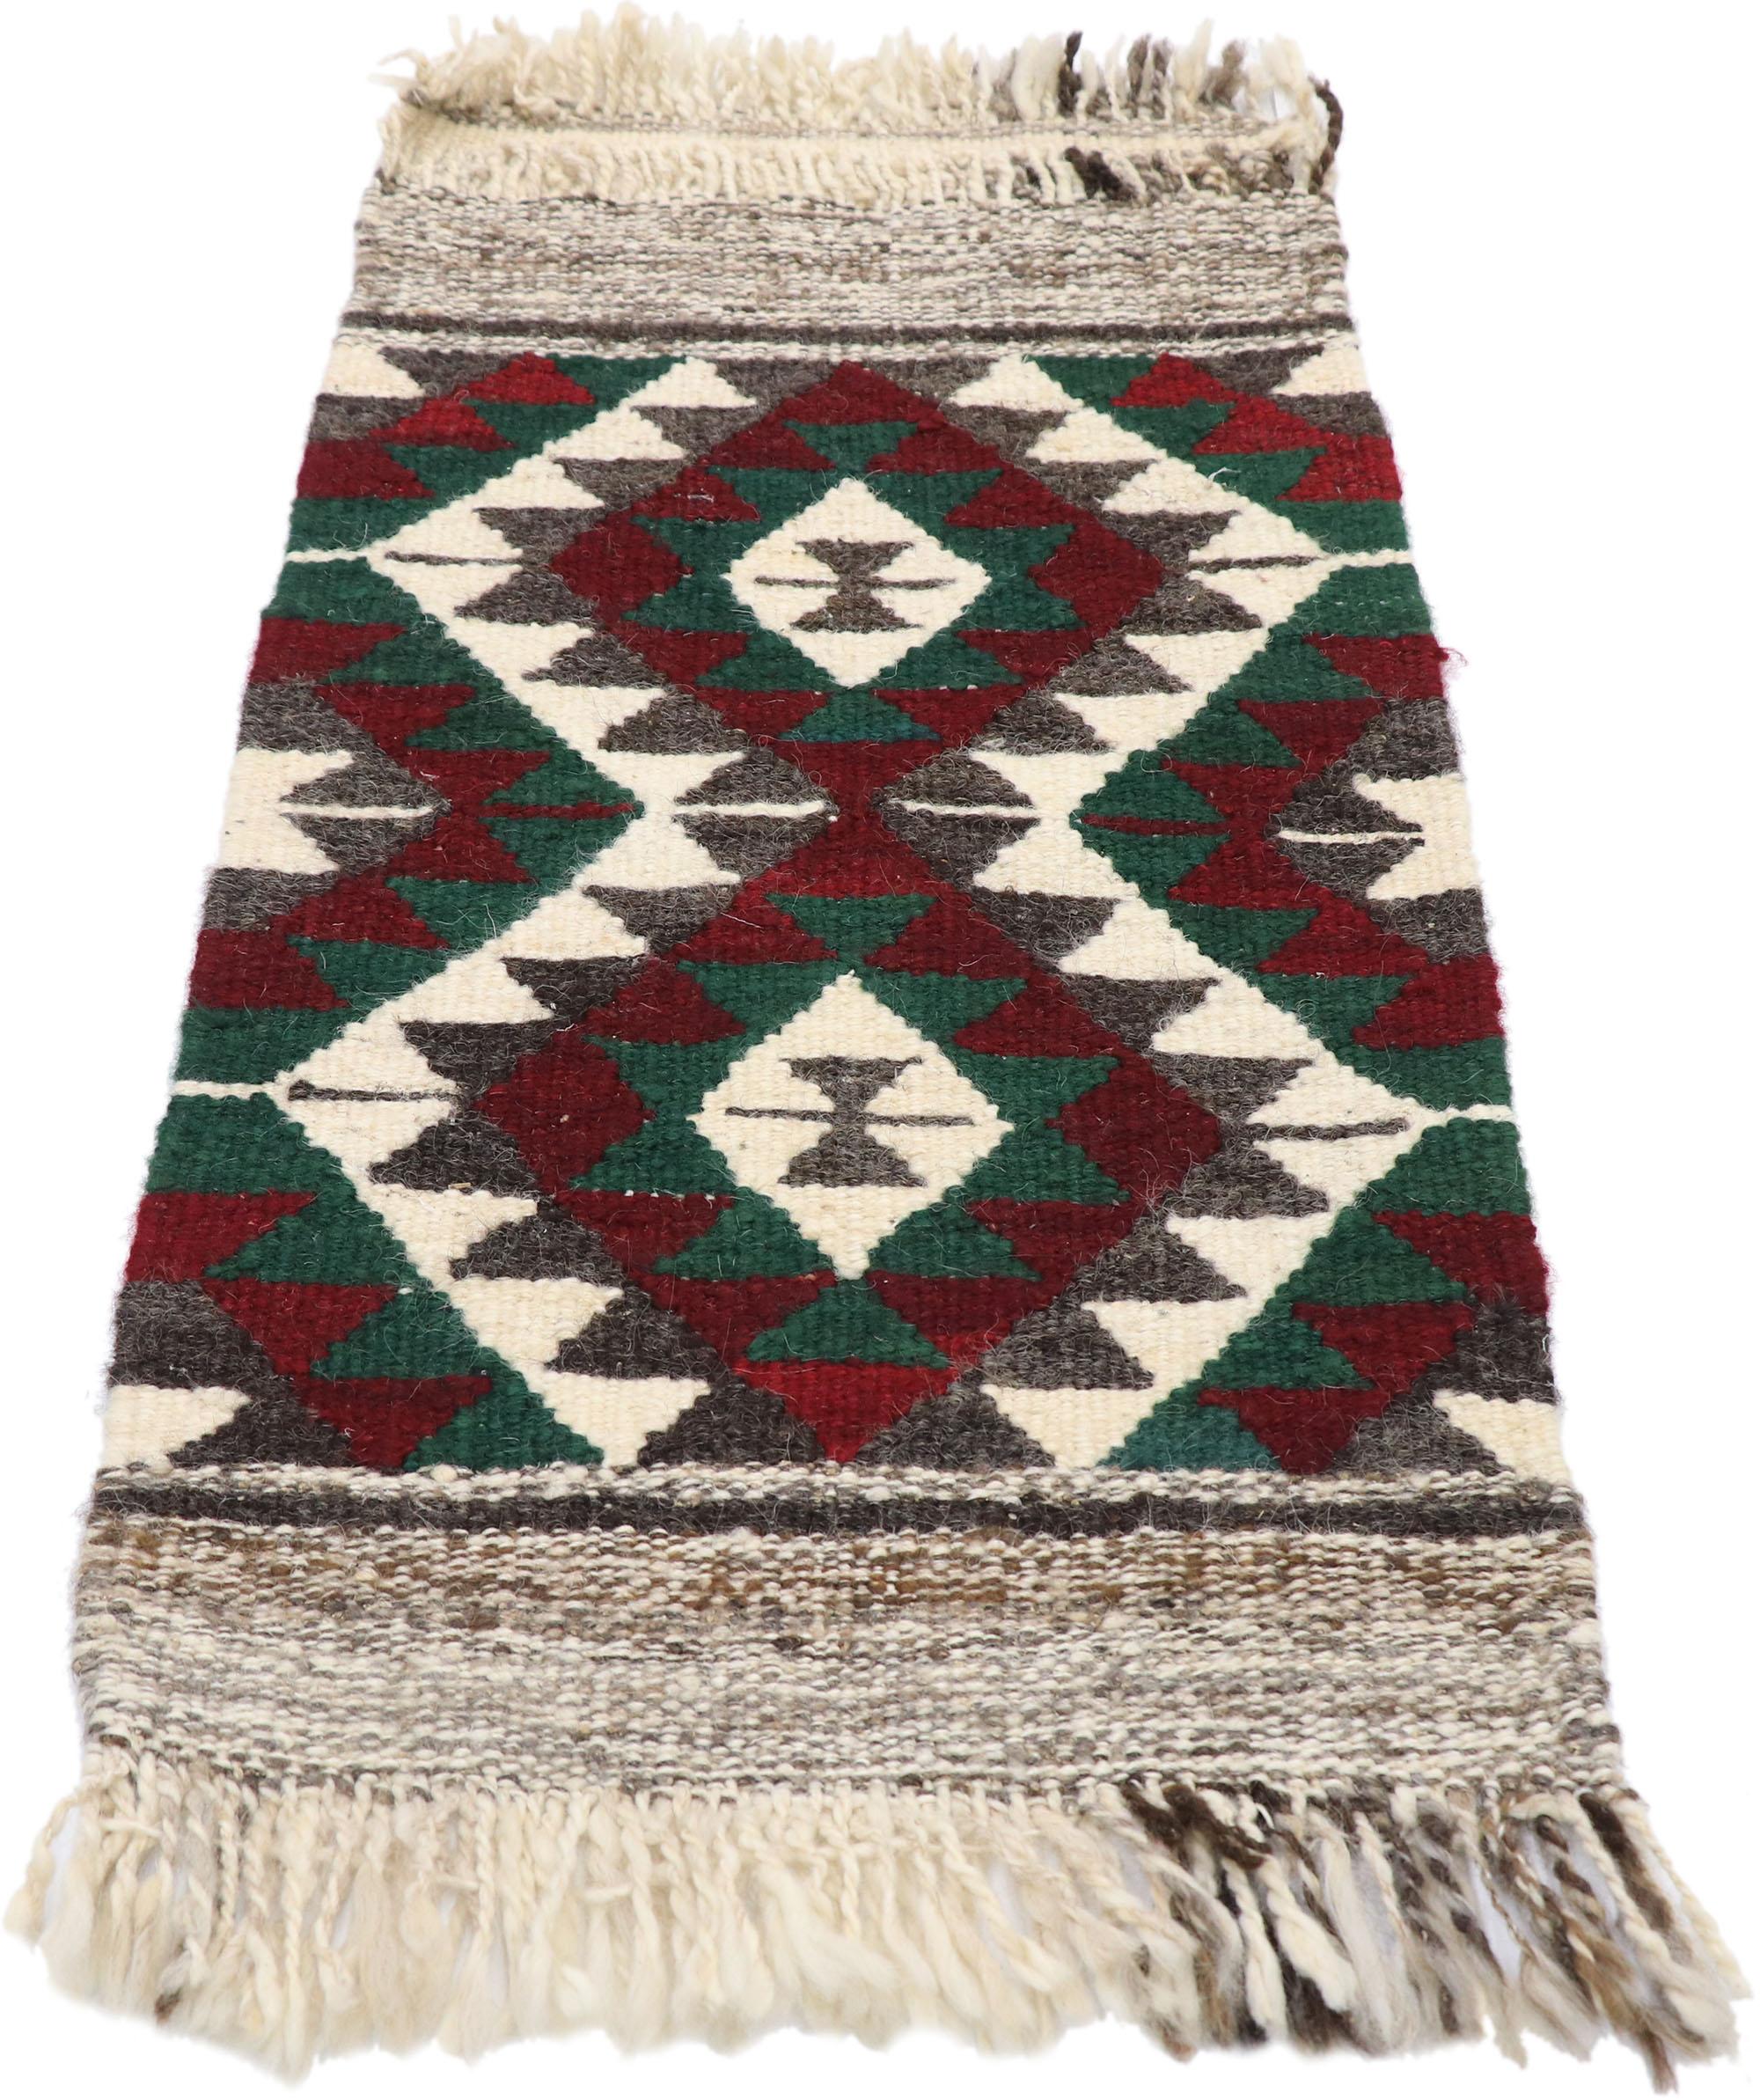 Hand-Woven Vintage Persian Shiraz Kilim Rug, Luxury Lodge Meets Pacific Northwest Style For Sale